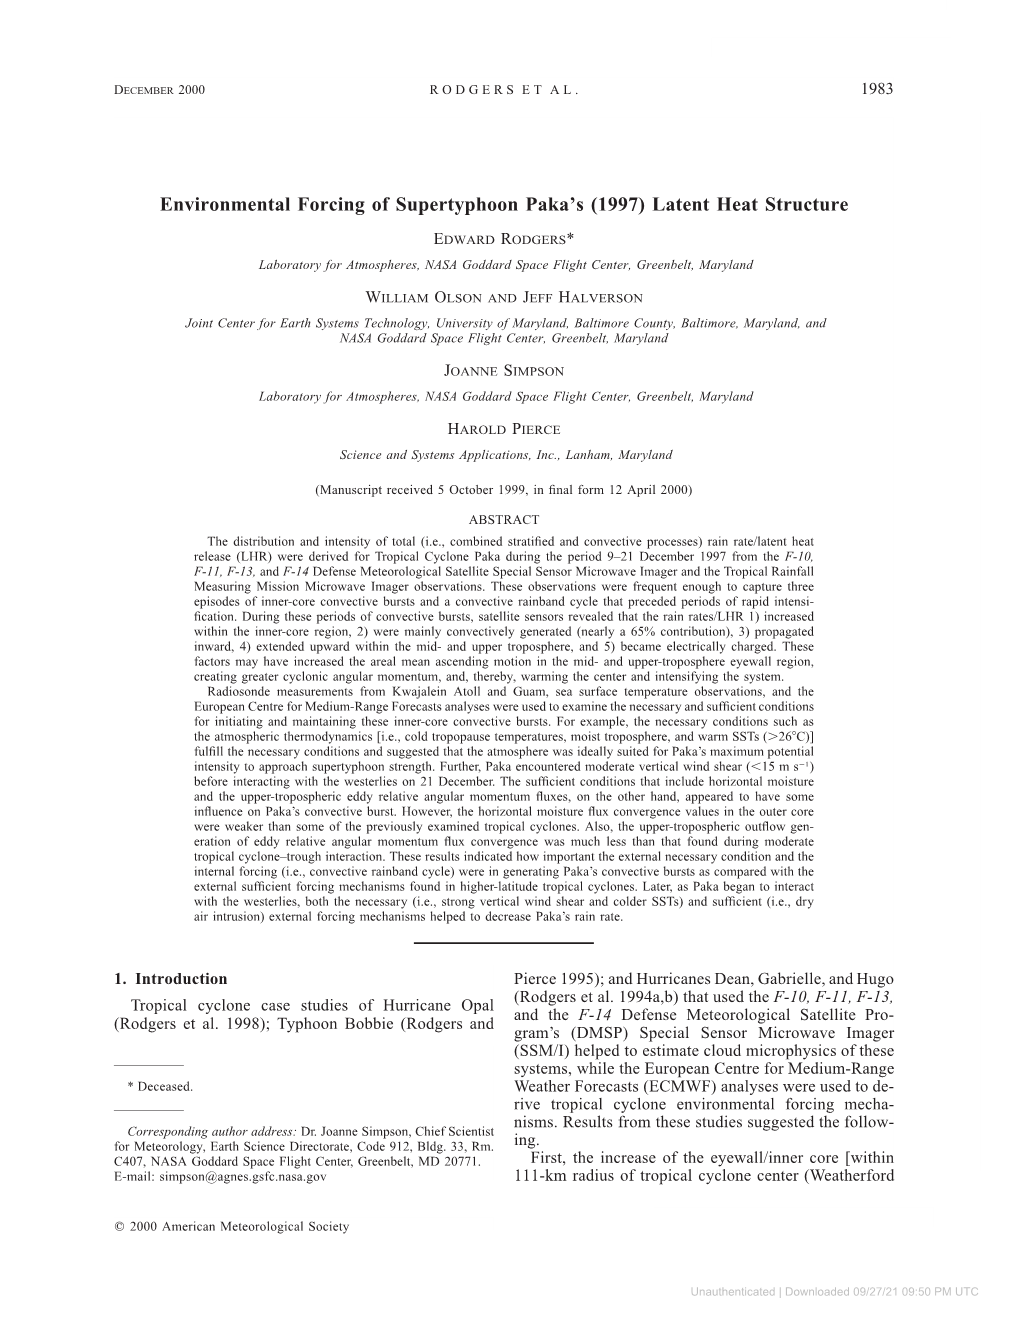 Environmental Forcing of Supertyphoon Paka's (1997) Latent Heat Structure